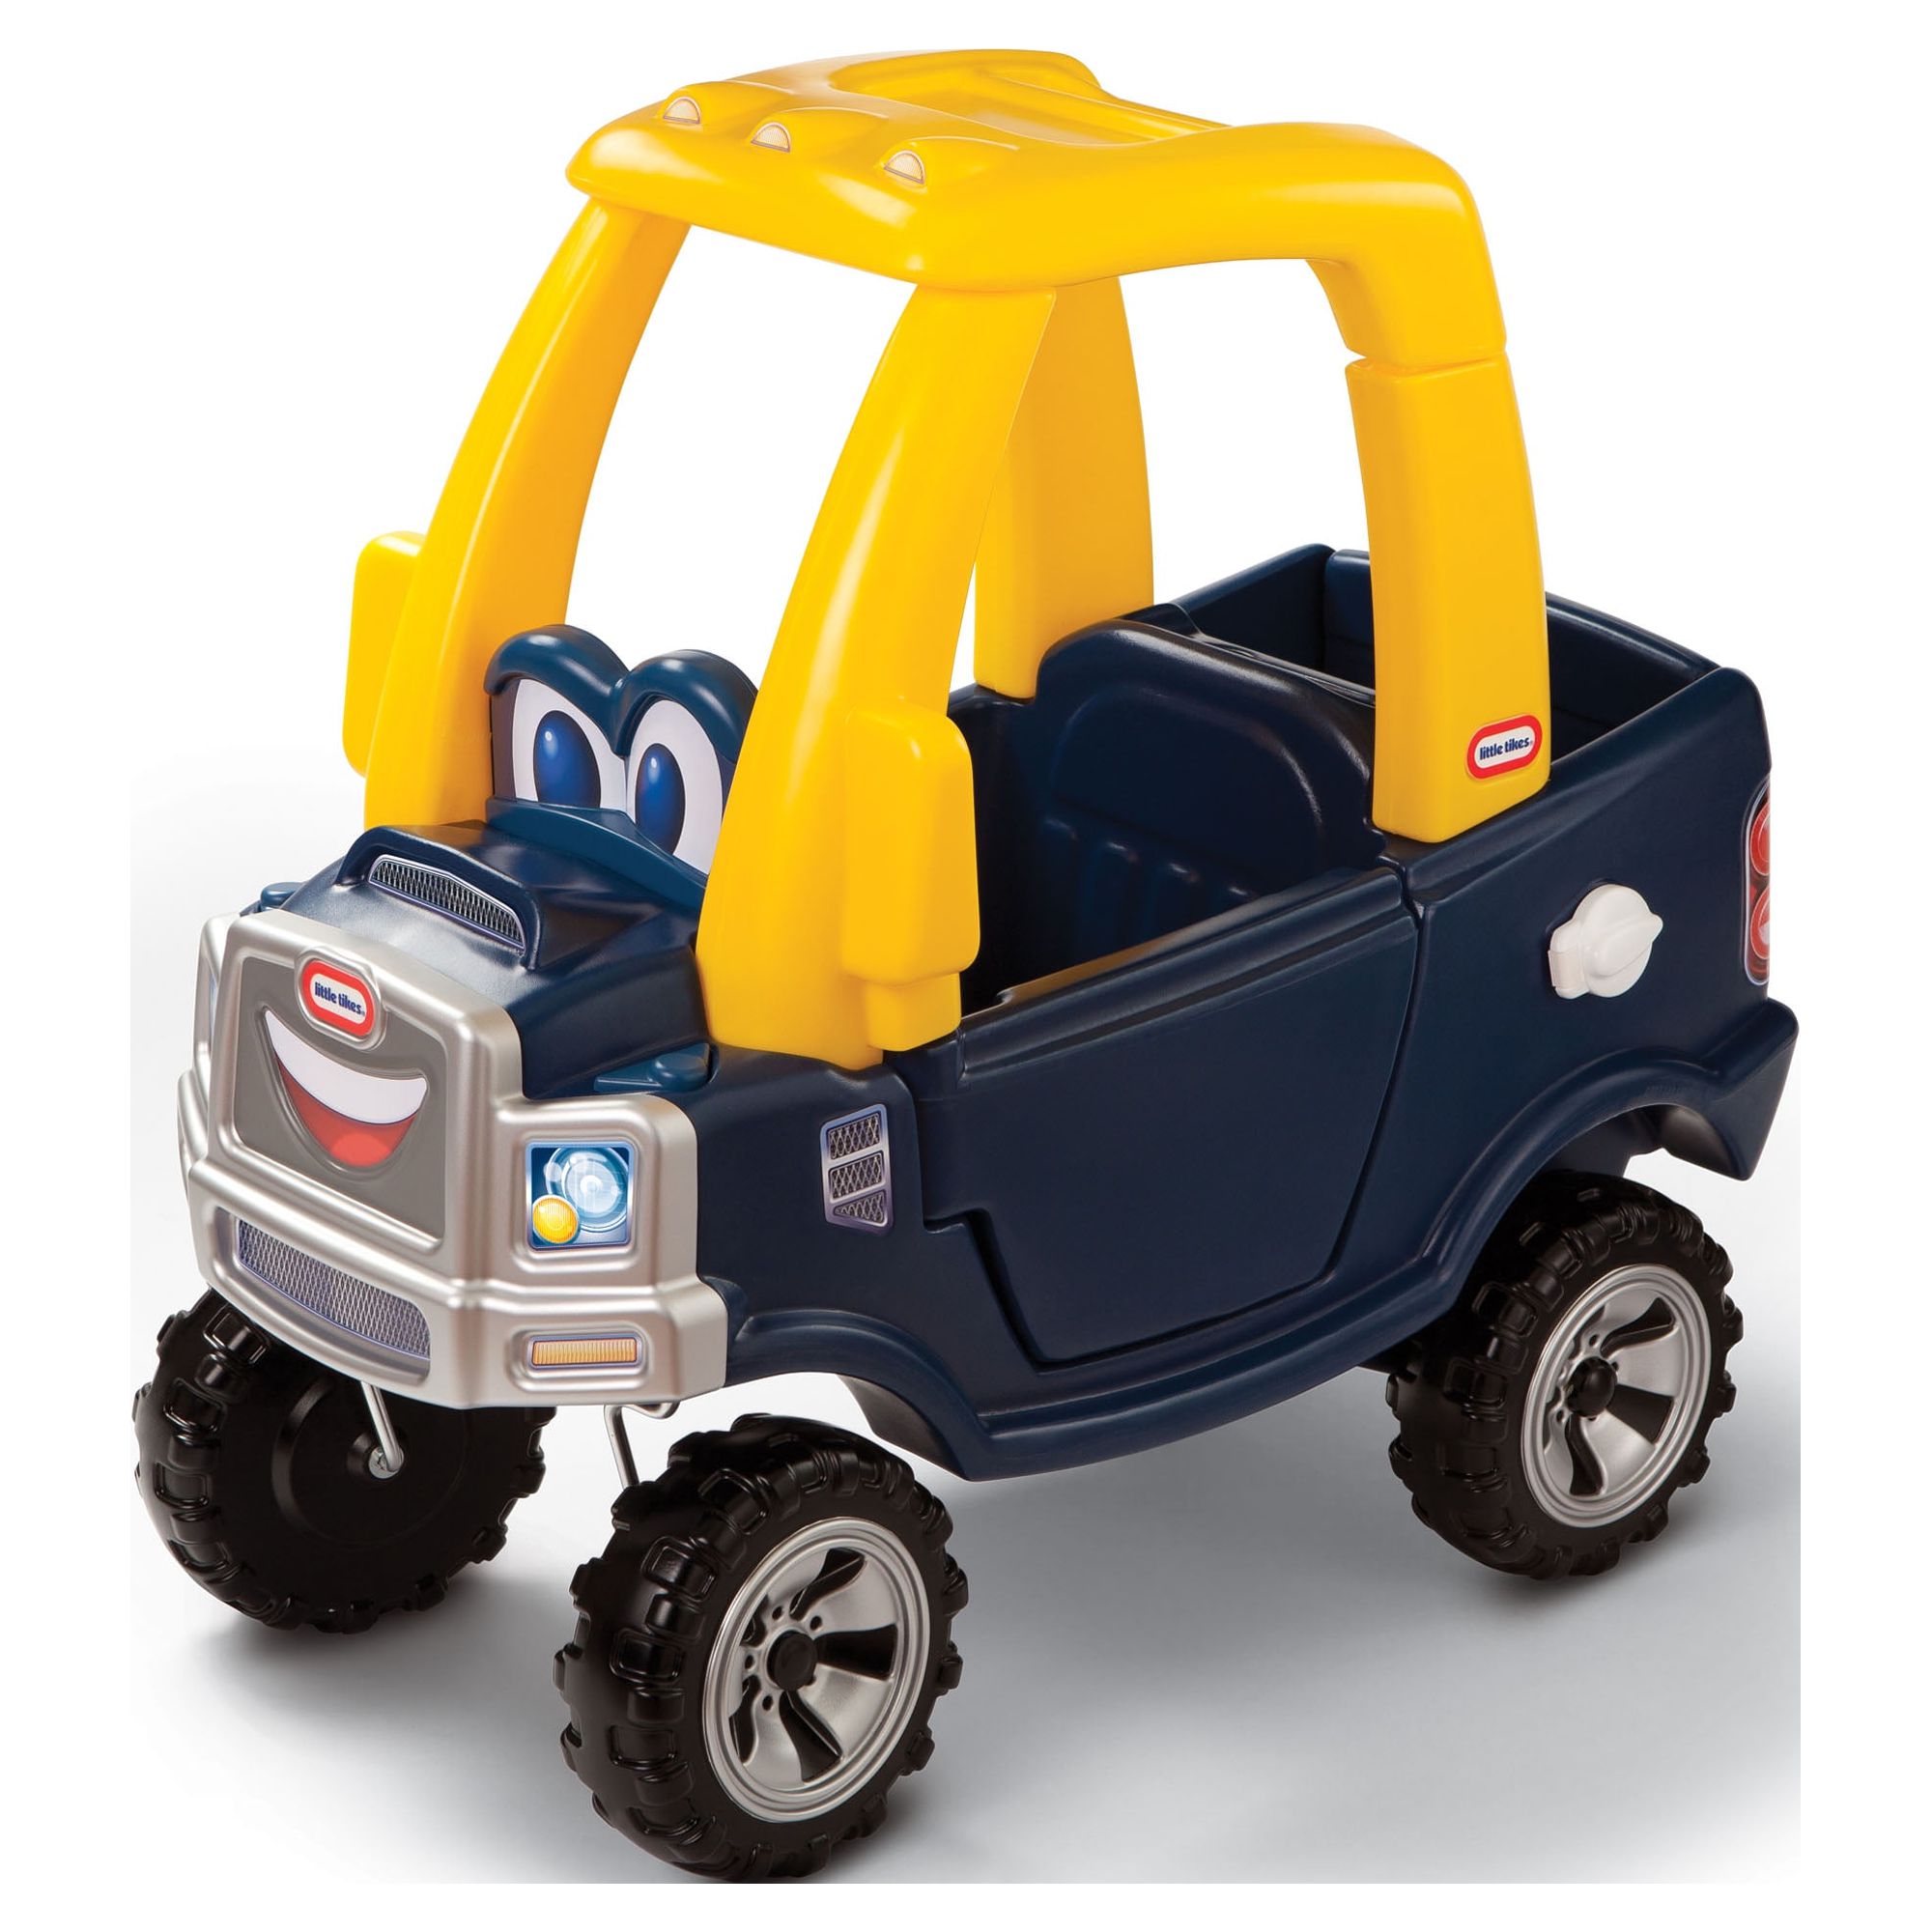 Little Tikes Cozy Truck Ride-on with Removable Floorboard, 18 Months to 5 Years - image 3 of 9